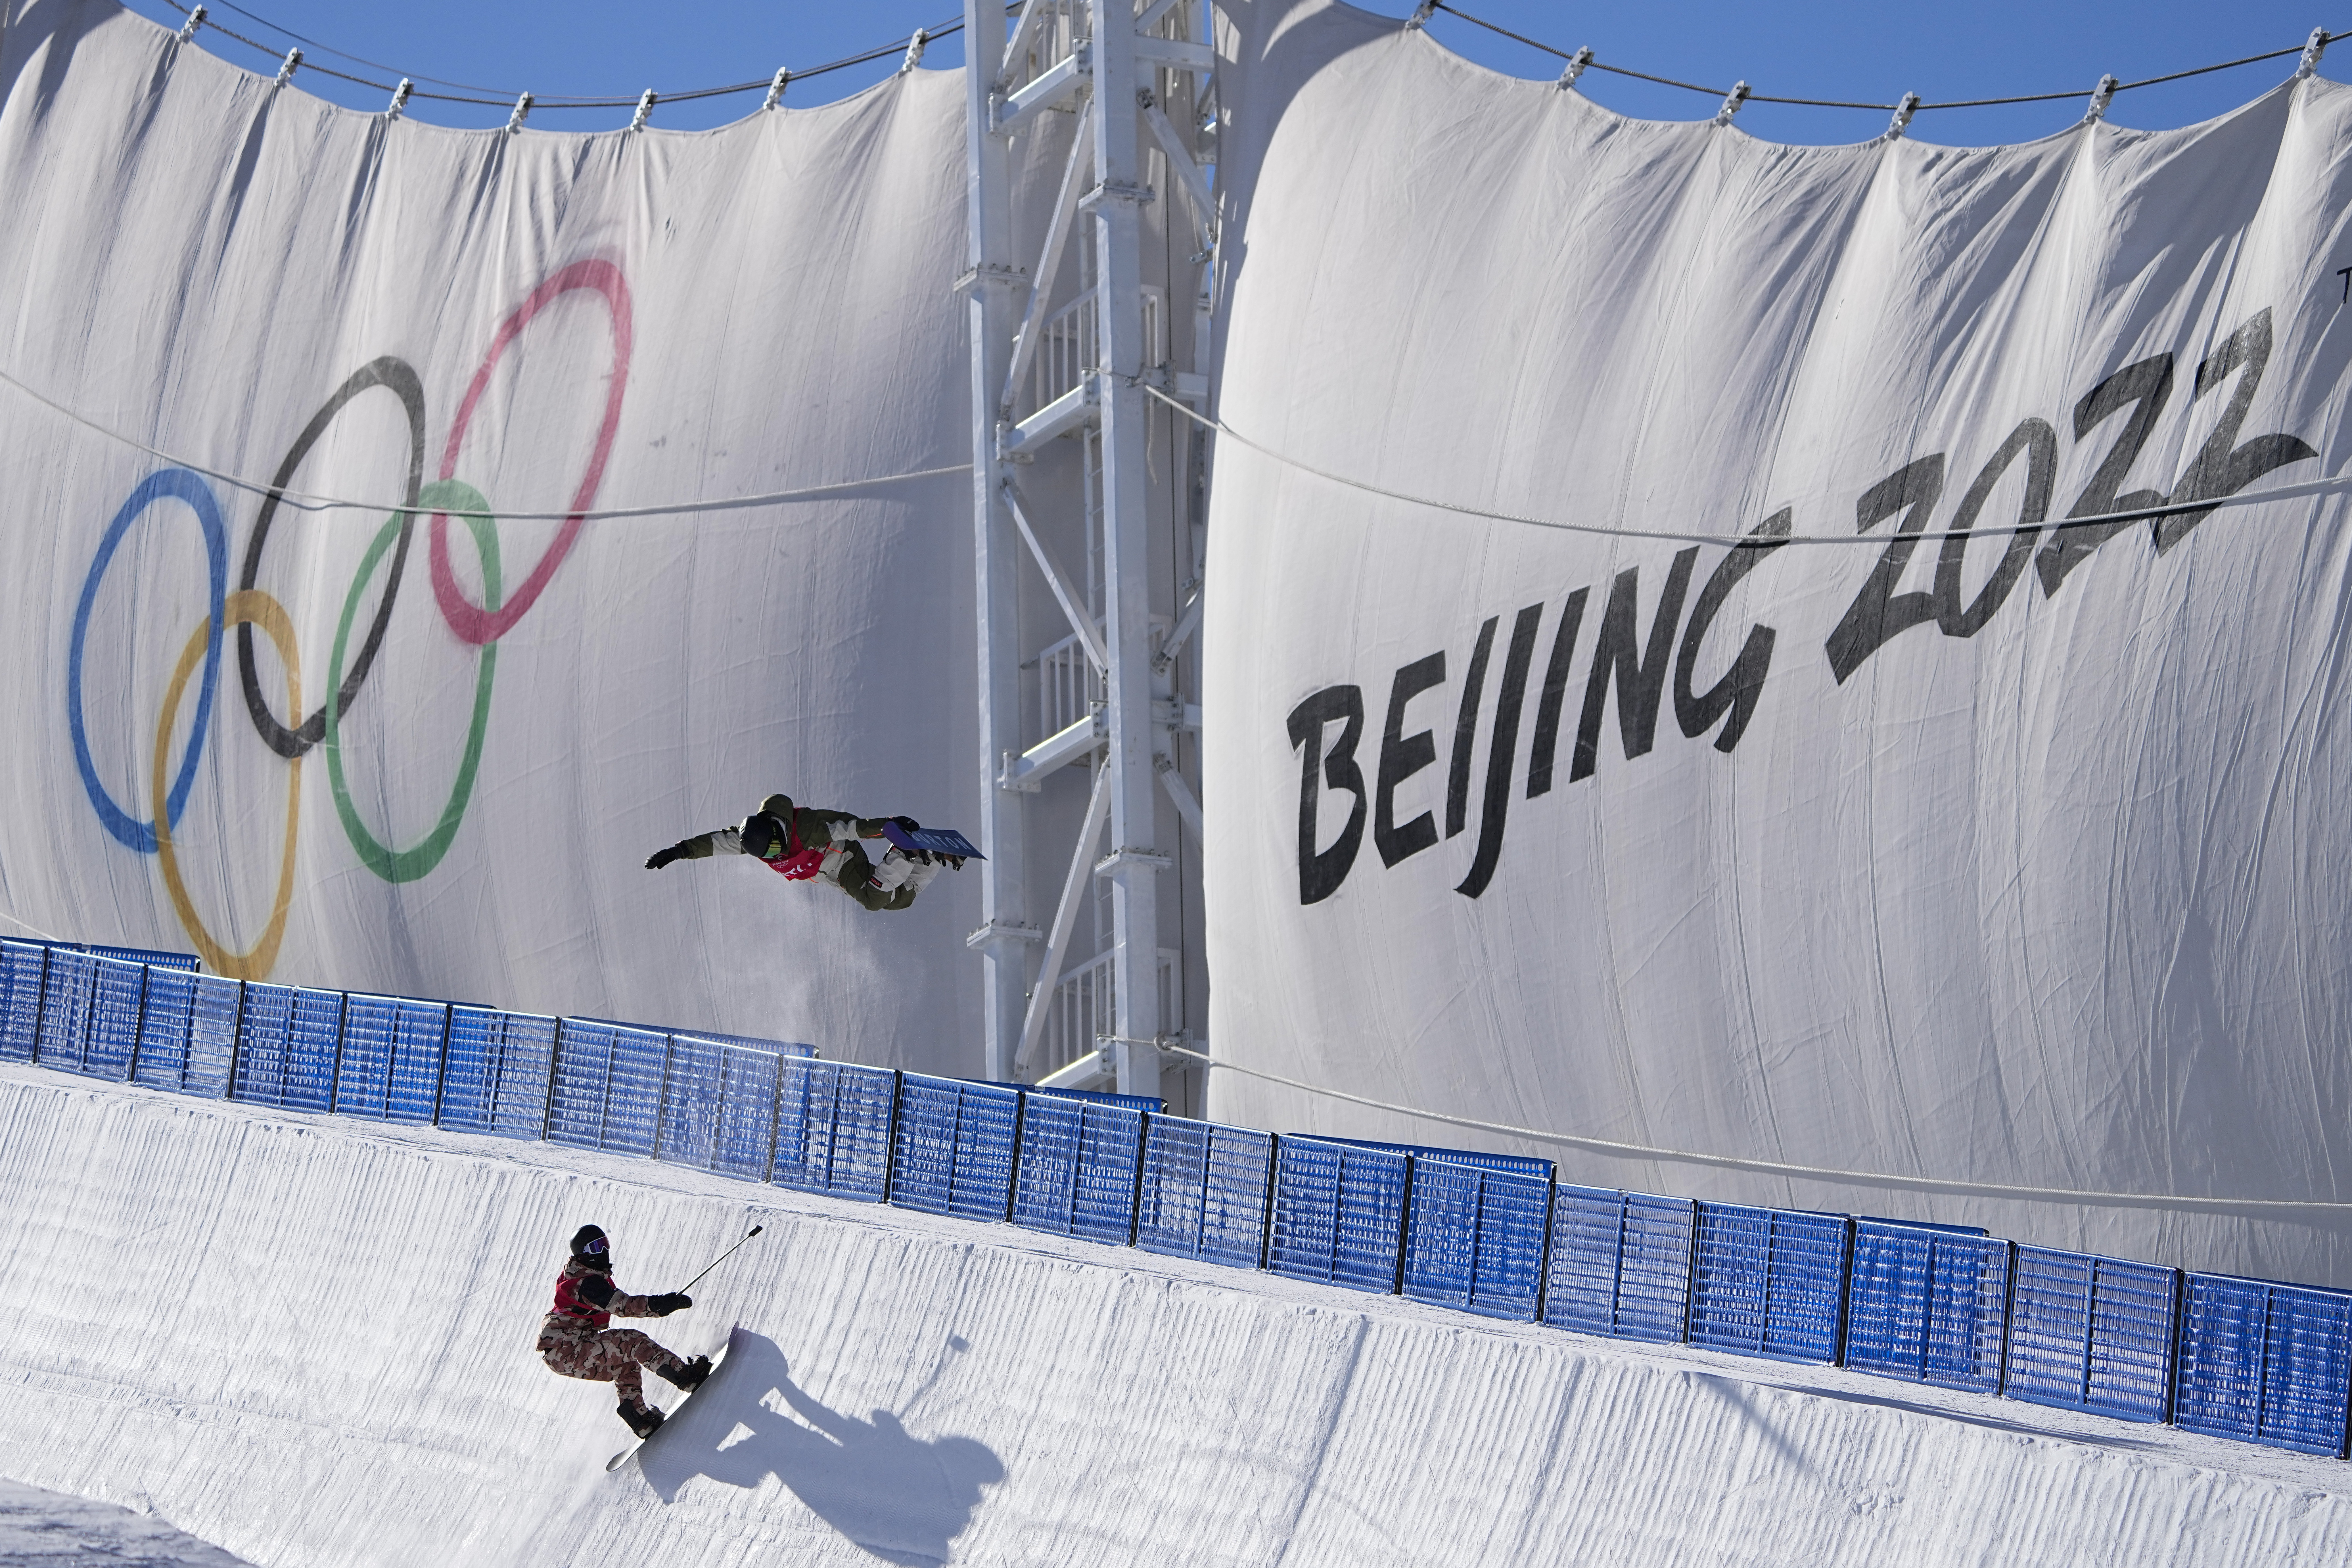 From Torino to Beijing: Coming Full Circle With Snowboarding